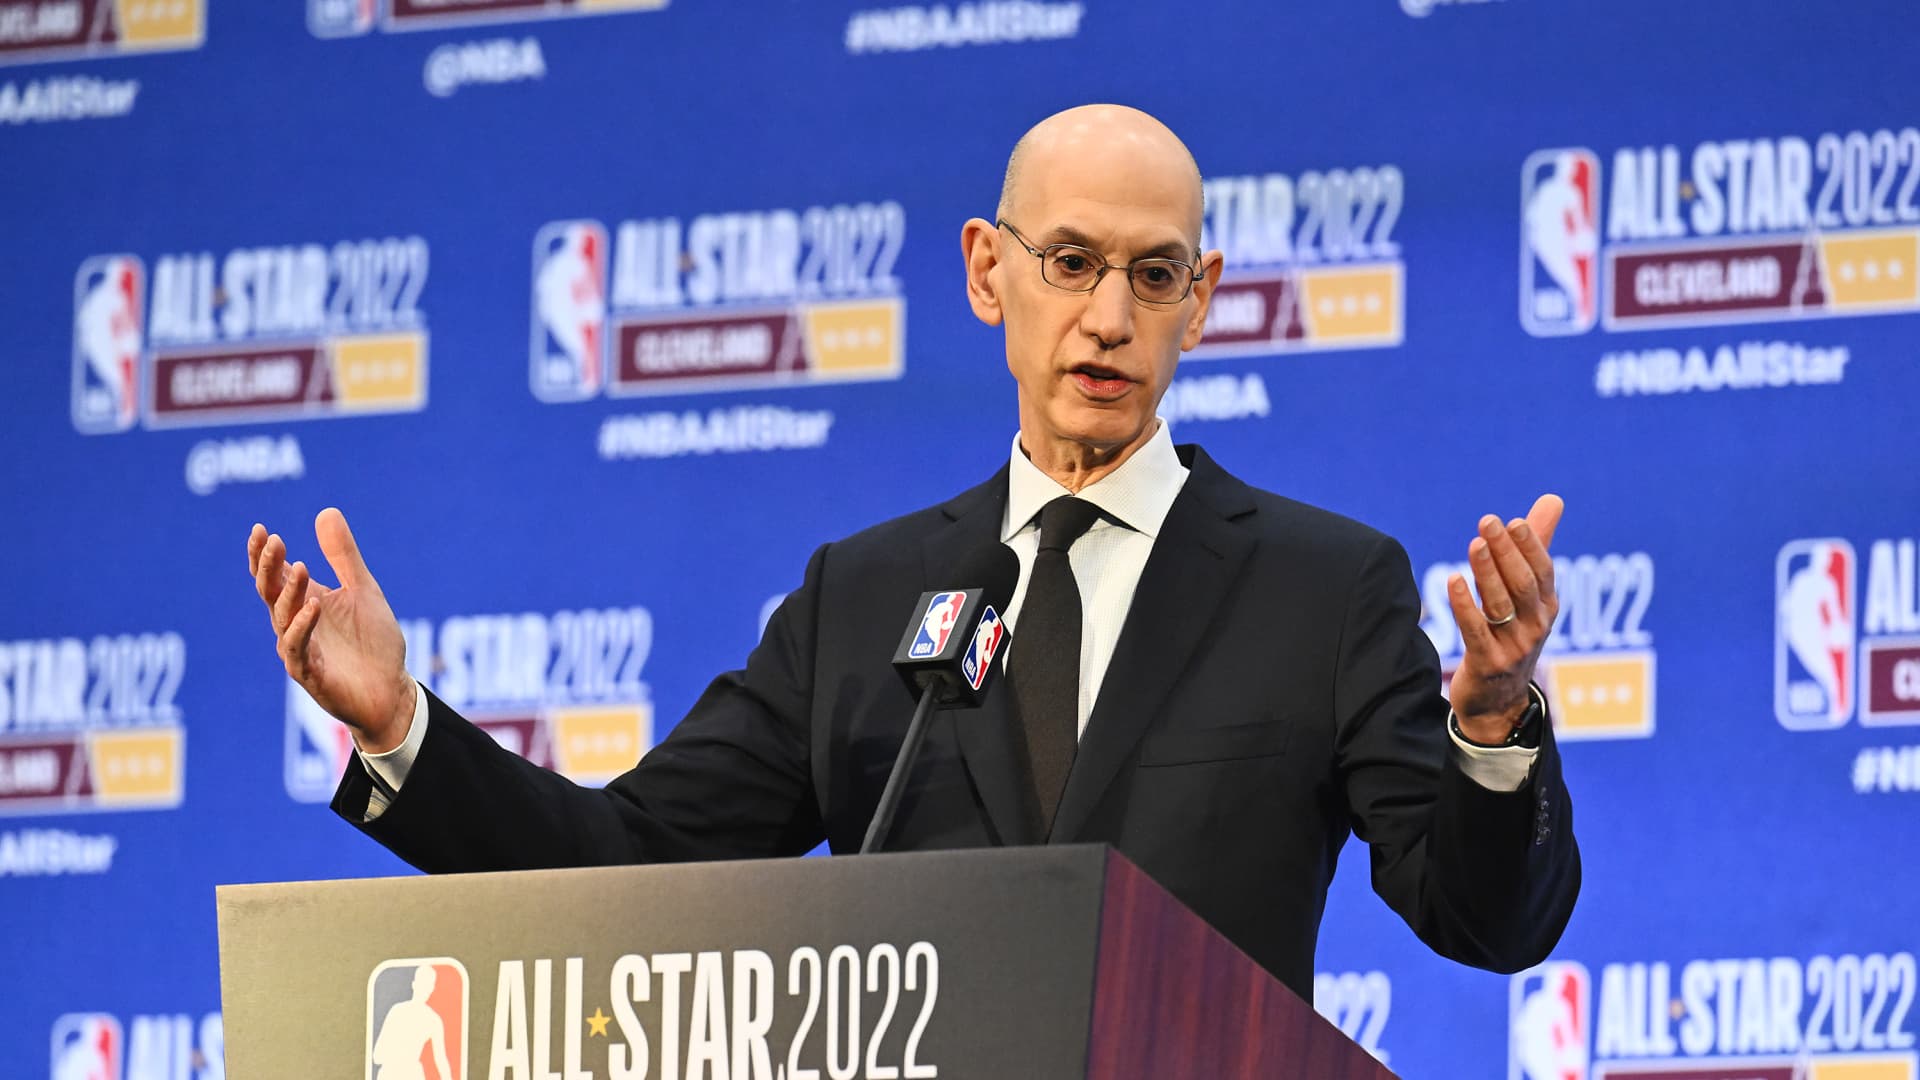 The NBA TV rights deal hinges on Warner Bros. Discovery